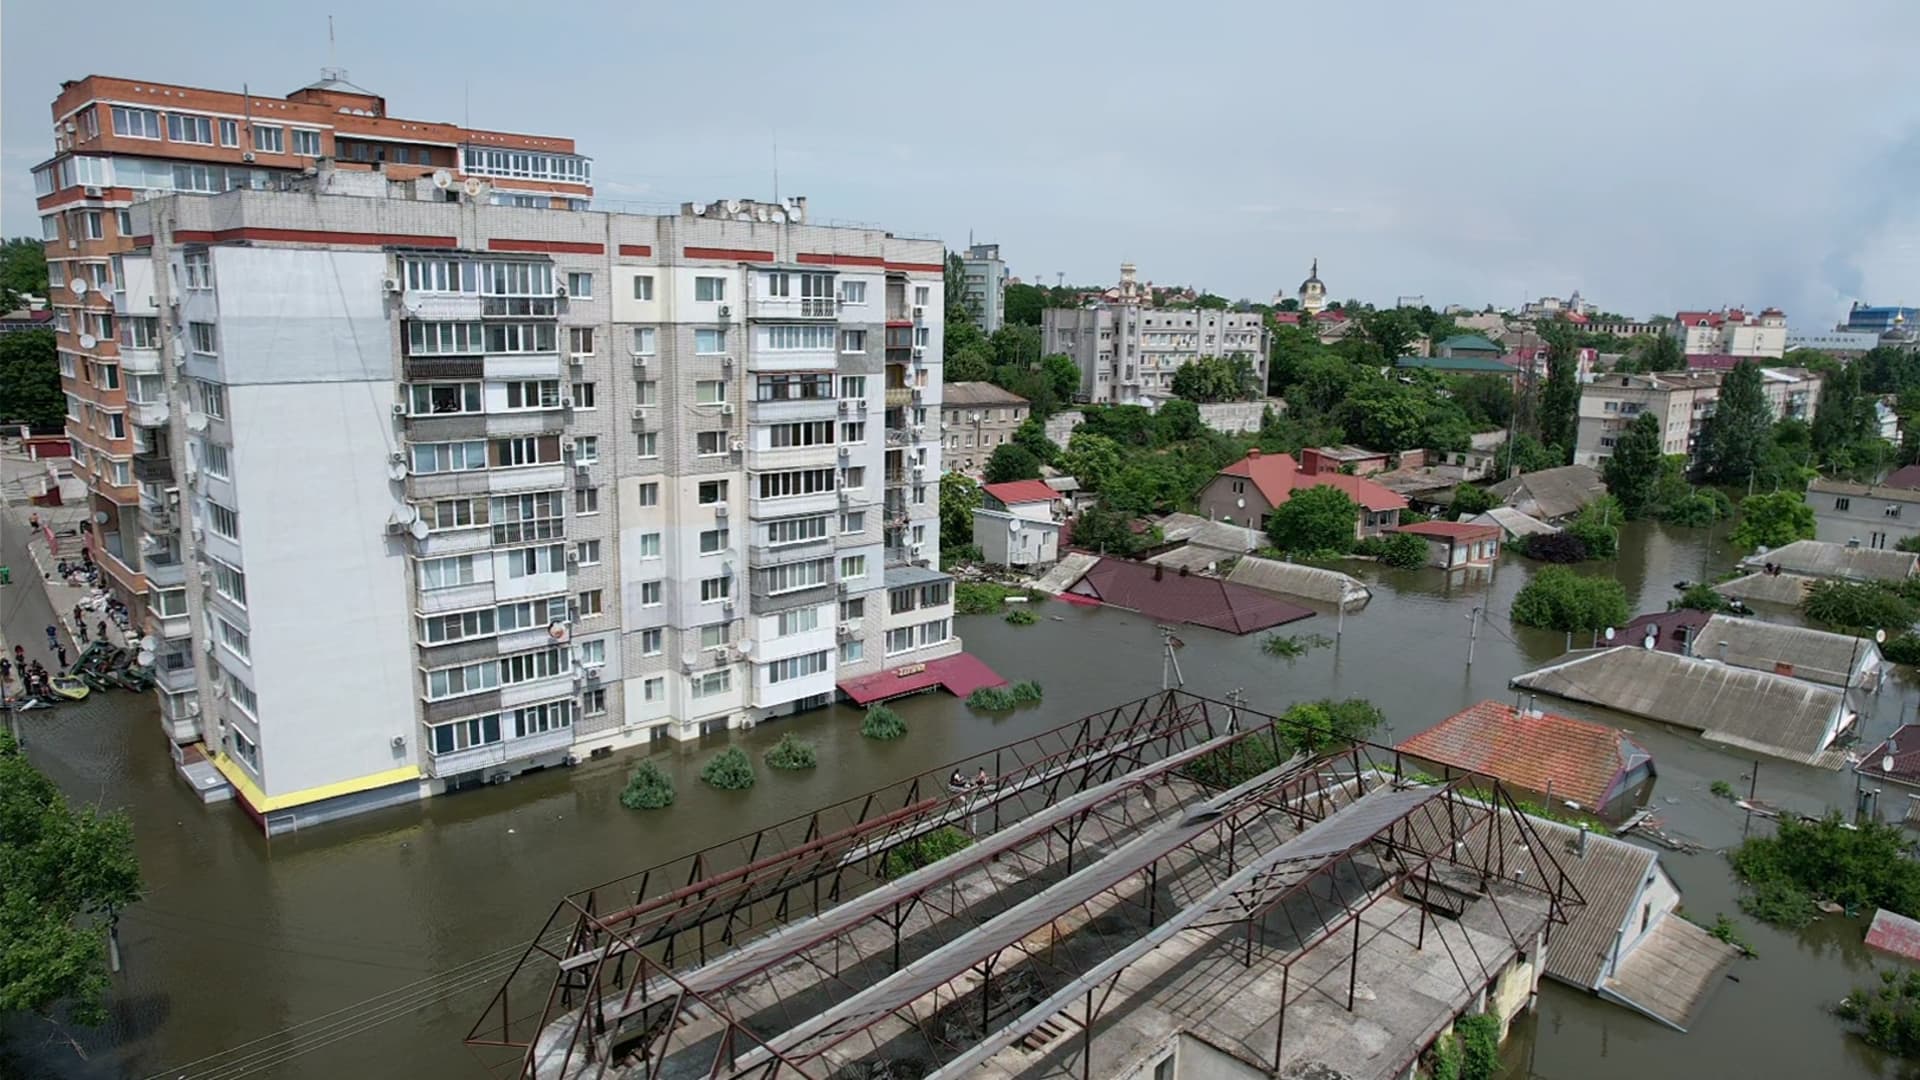 Residential buildings in a flooded area on June 8, 2023 in Kherson, Ukraine. Early Tuesday, the Kakhovka dam and hydroelectric power plant, which sits on the Dnipro river in the southern Kherson region, was destroyed, forcing downstream communities to evacuate due to the risk of flooding. 